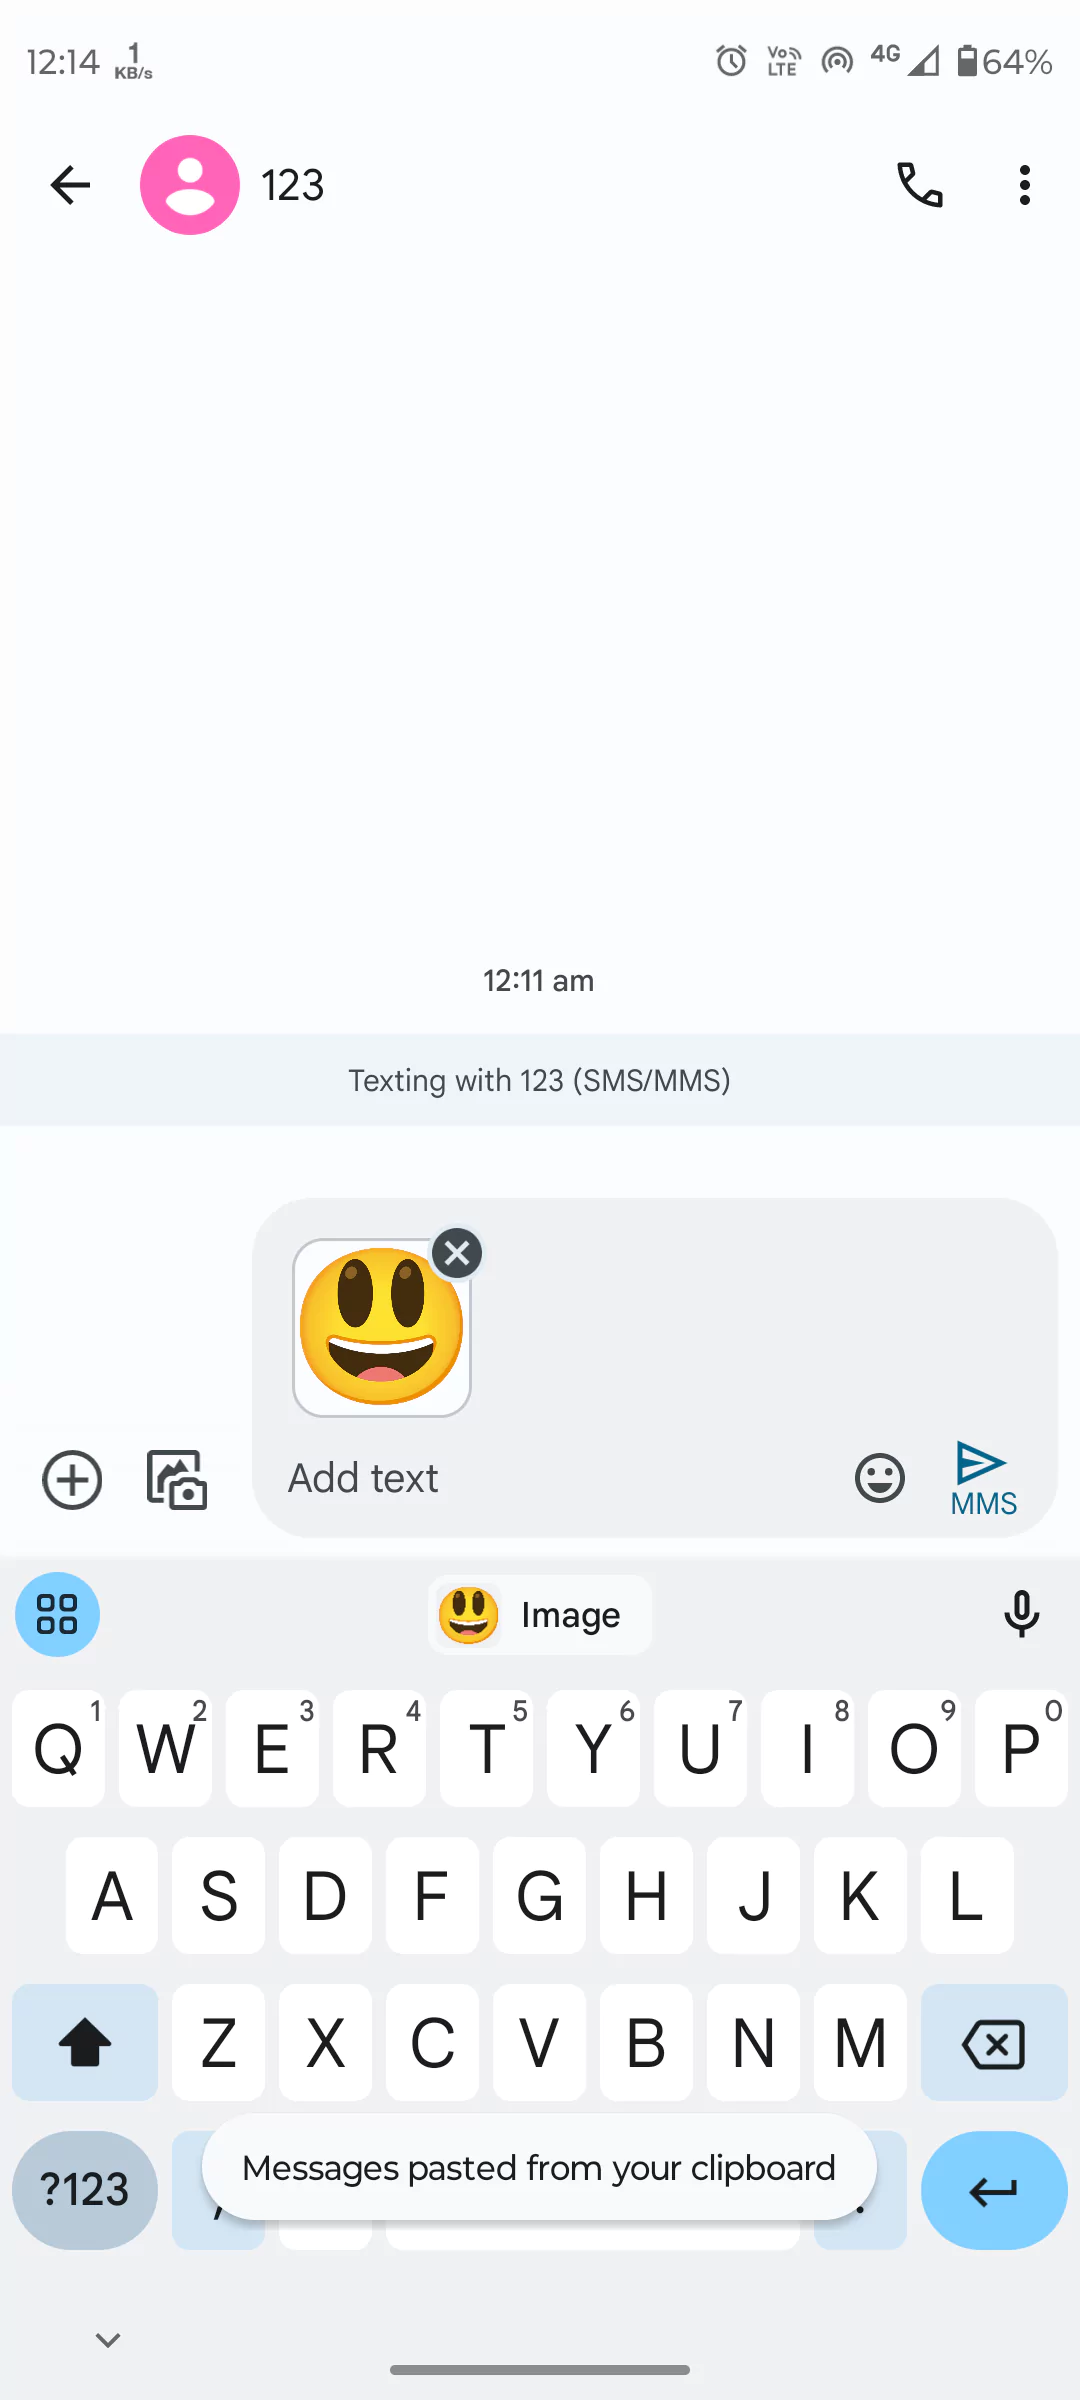 How to Combine Emojis on Android